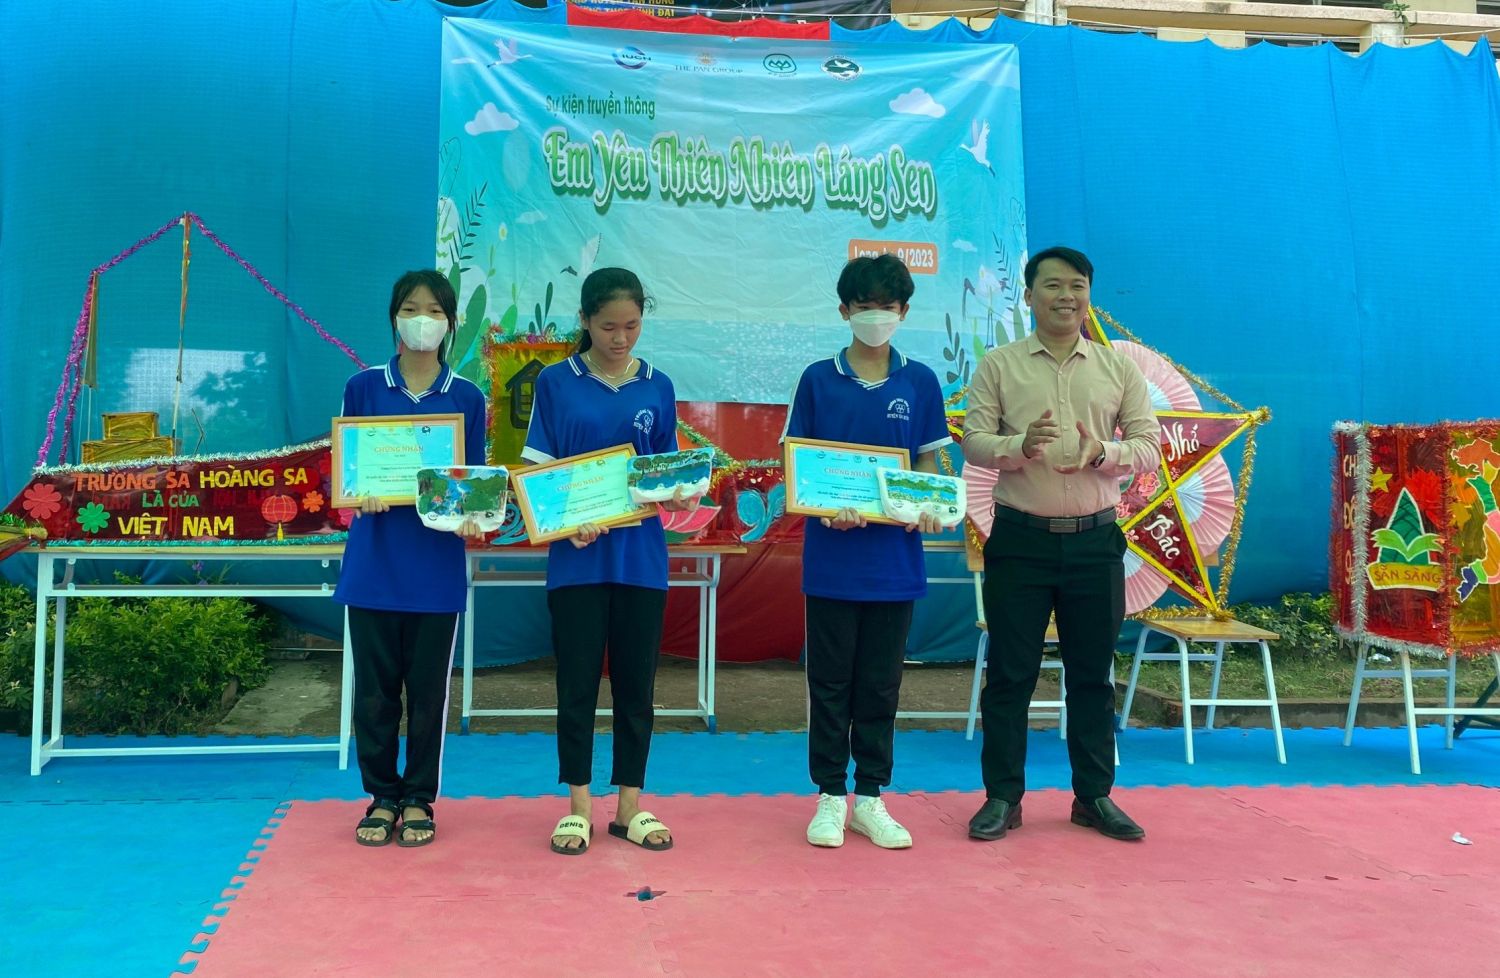 Students in Vinh Dai school received the third prize 